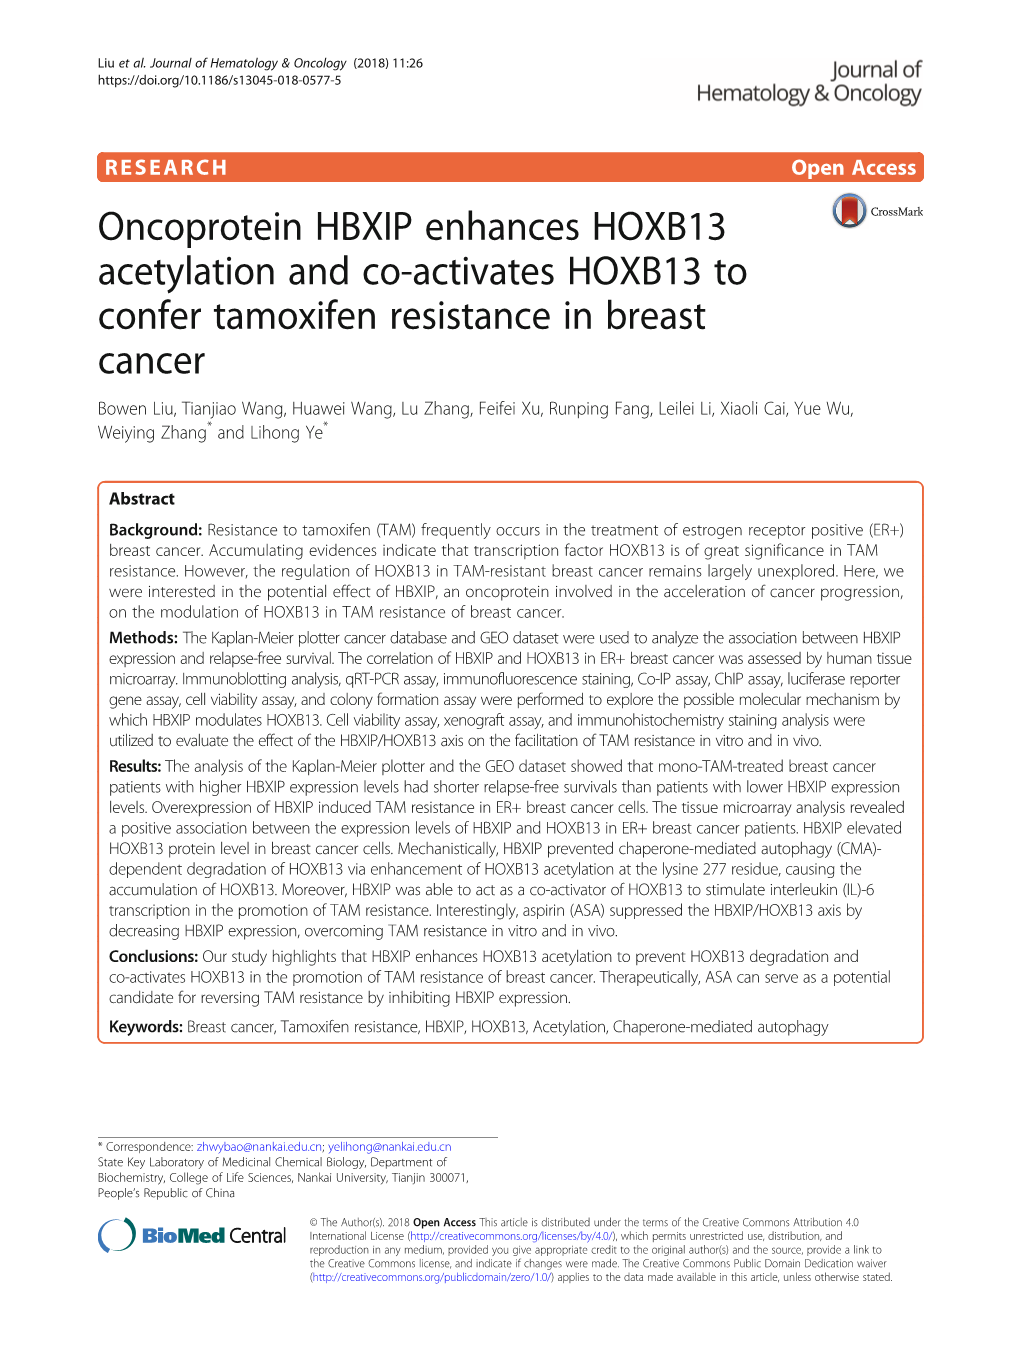 Oncoprotein HBXIP Enhances HOXB13 Acetylation and Co